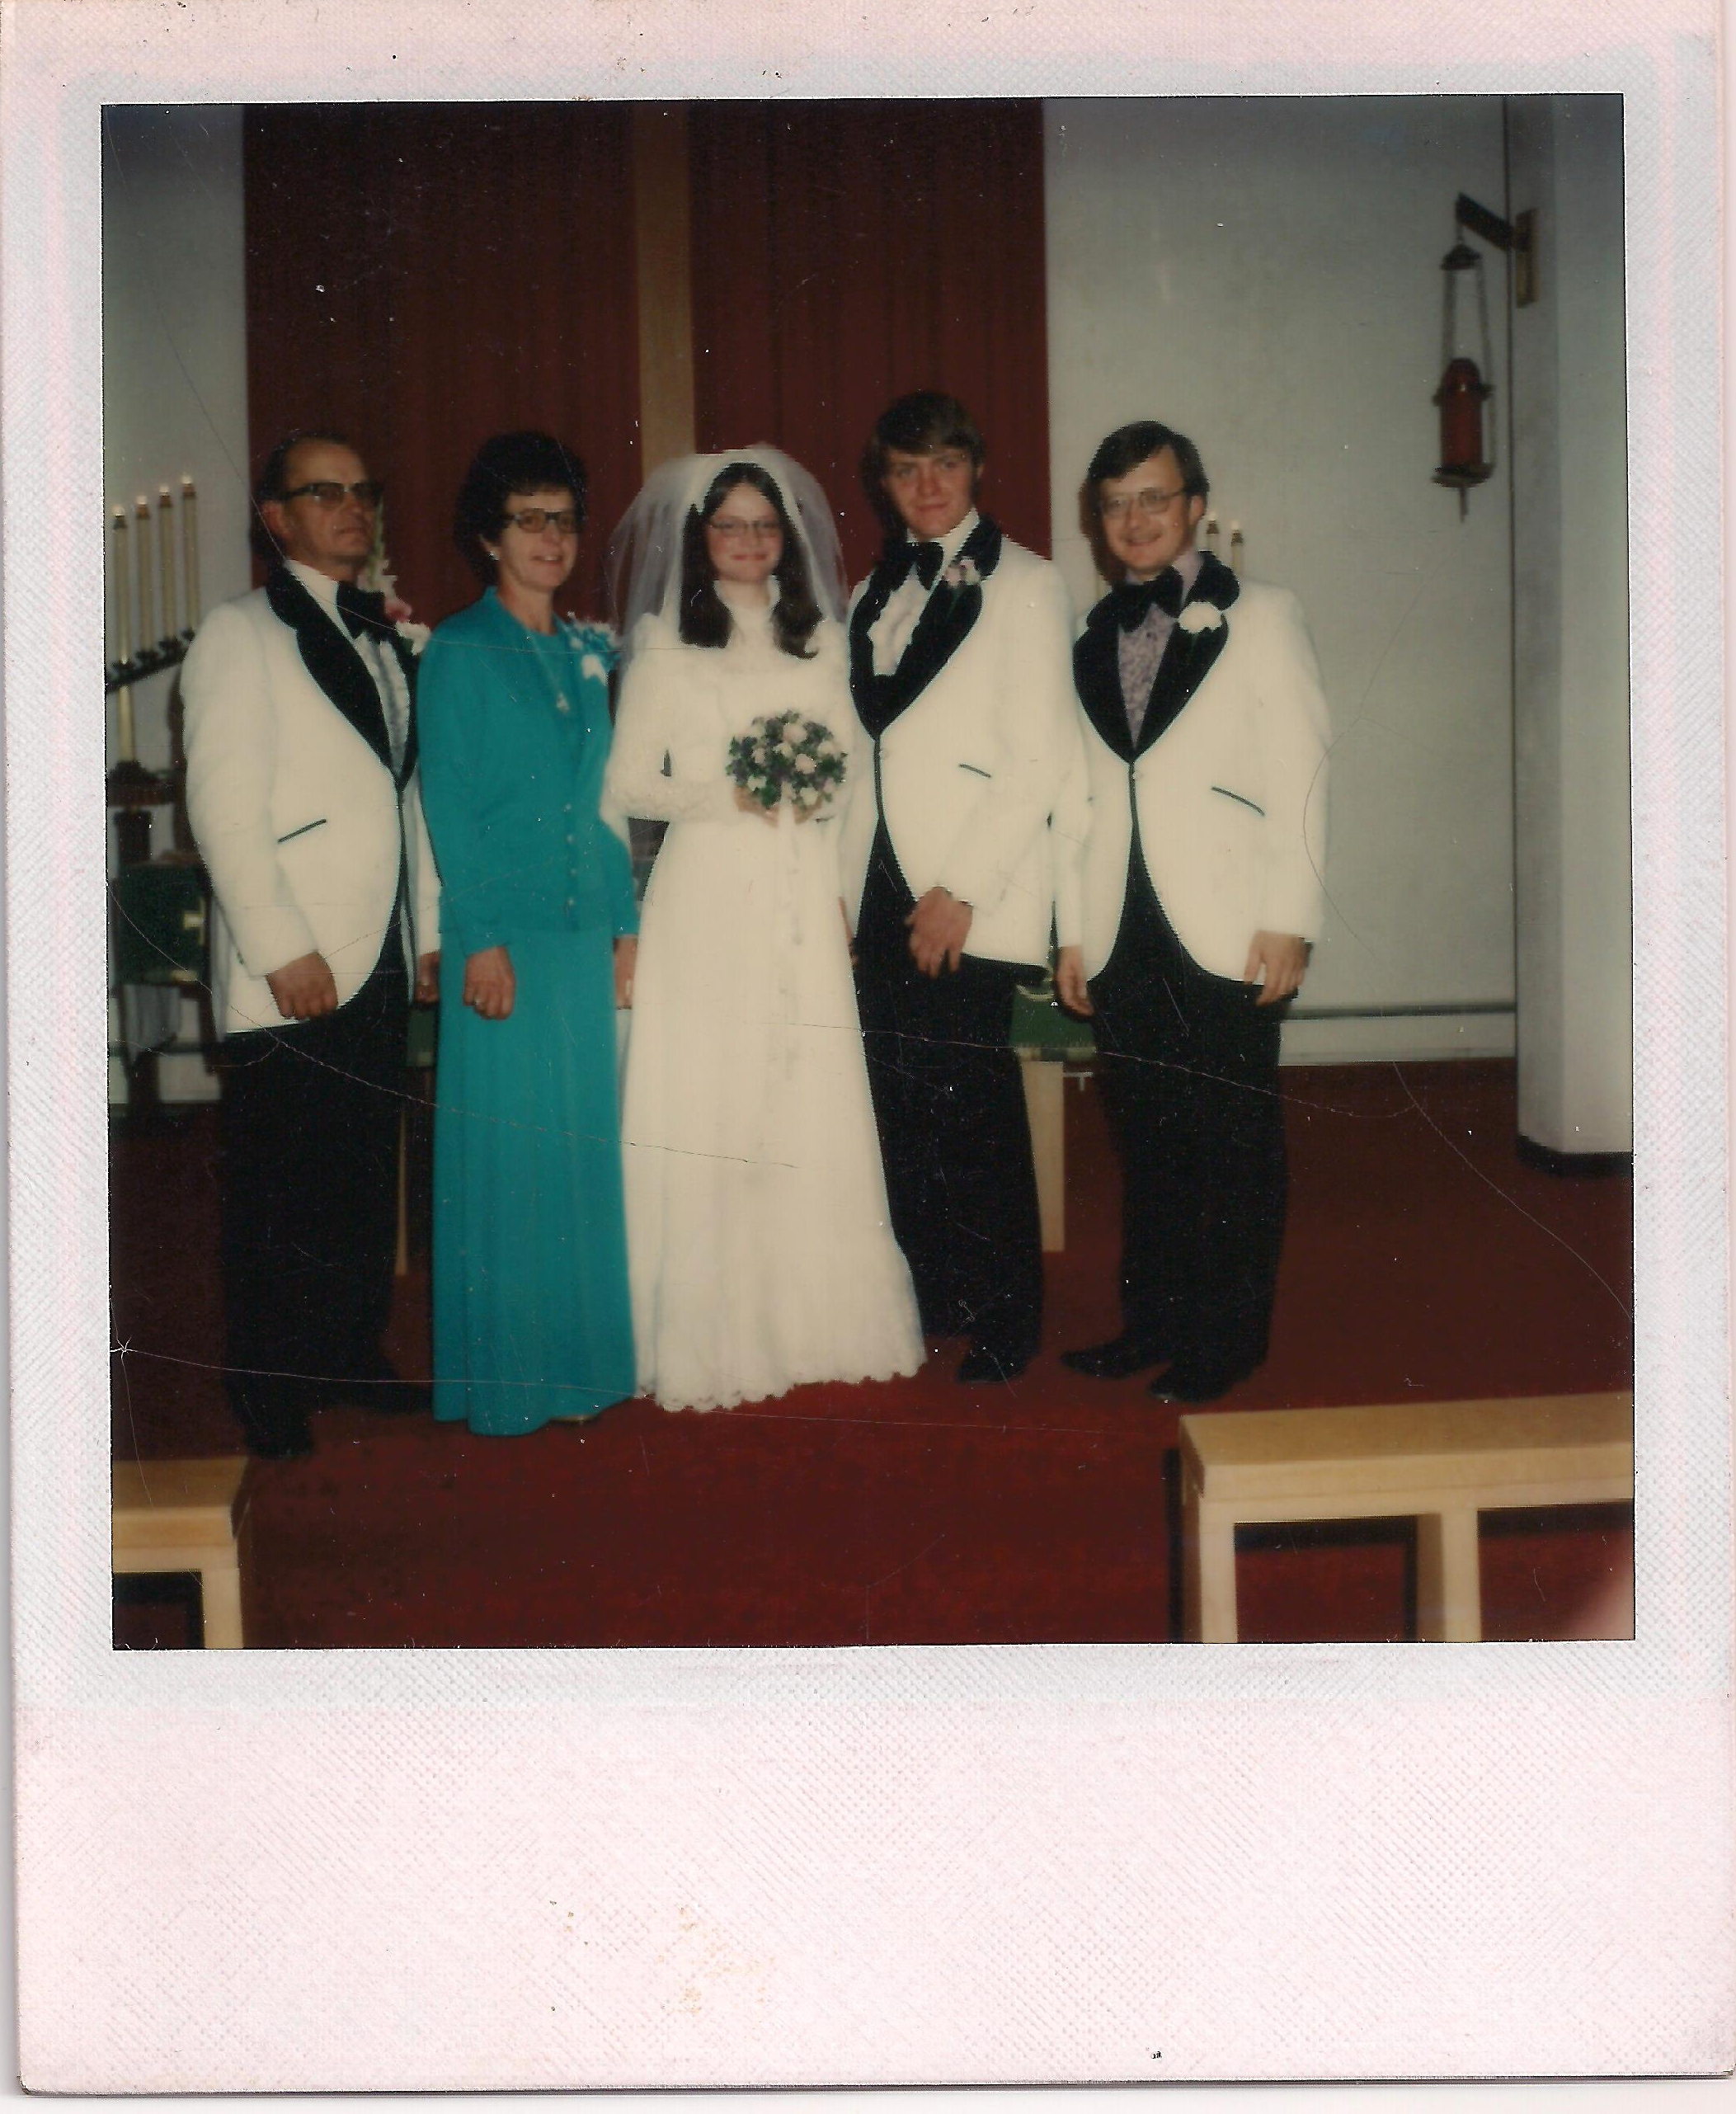 Mr and Mrs Hall Moore with father, mother and brother